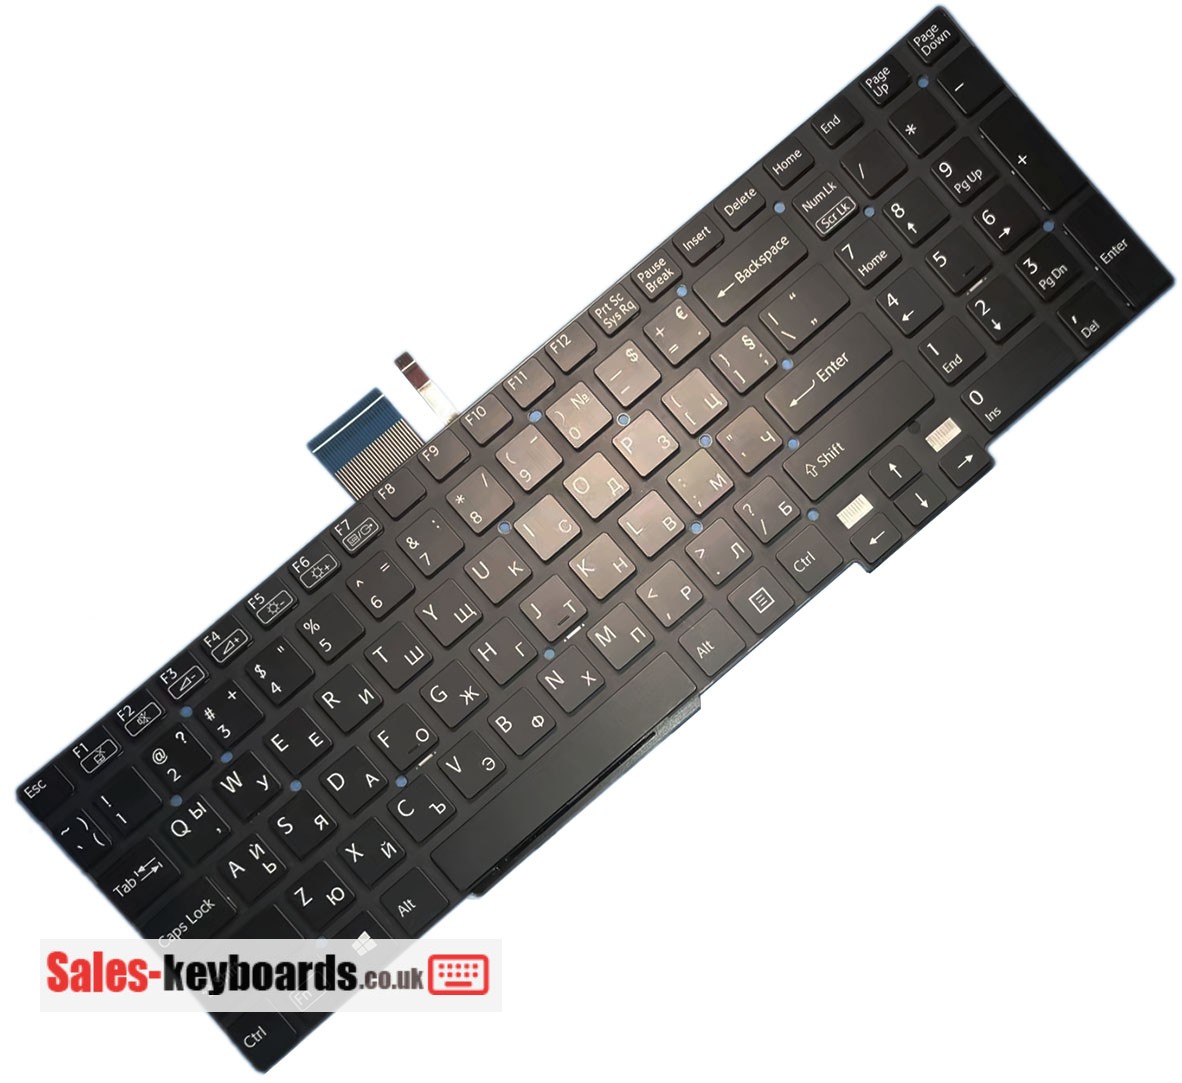 Sony VAIO SVT1511ACXS Keyboard replacement